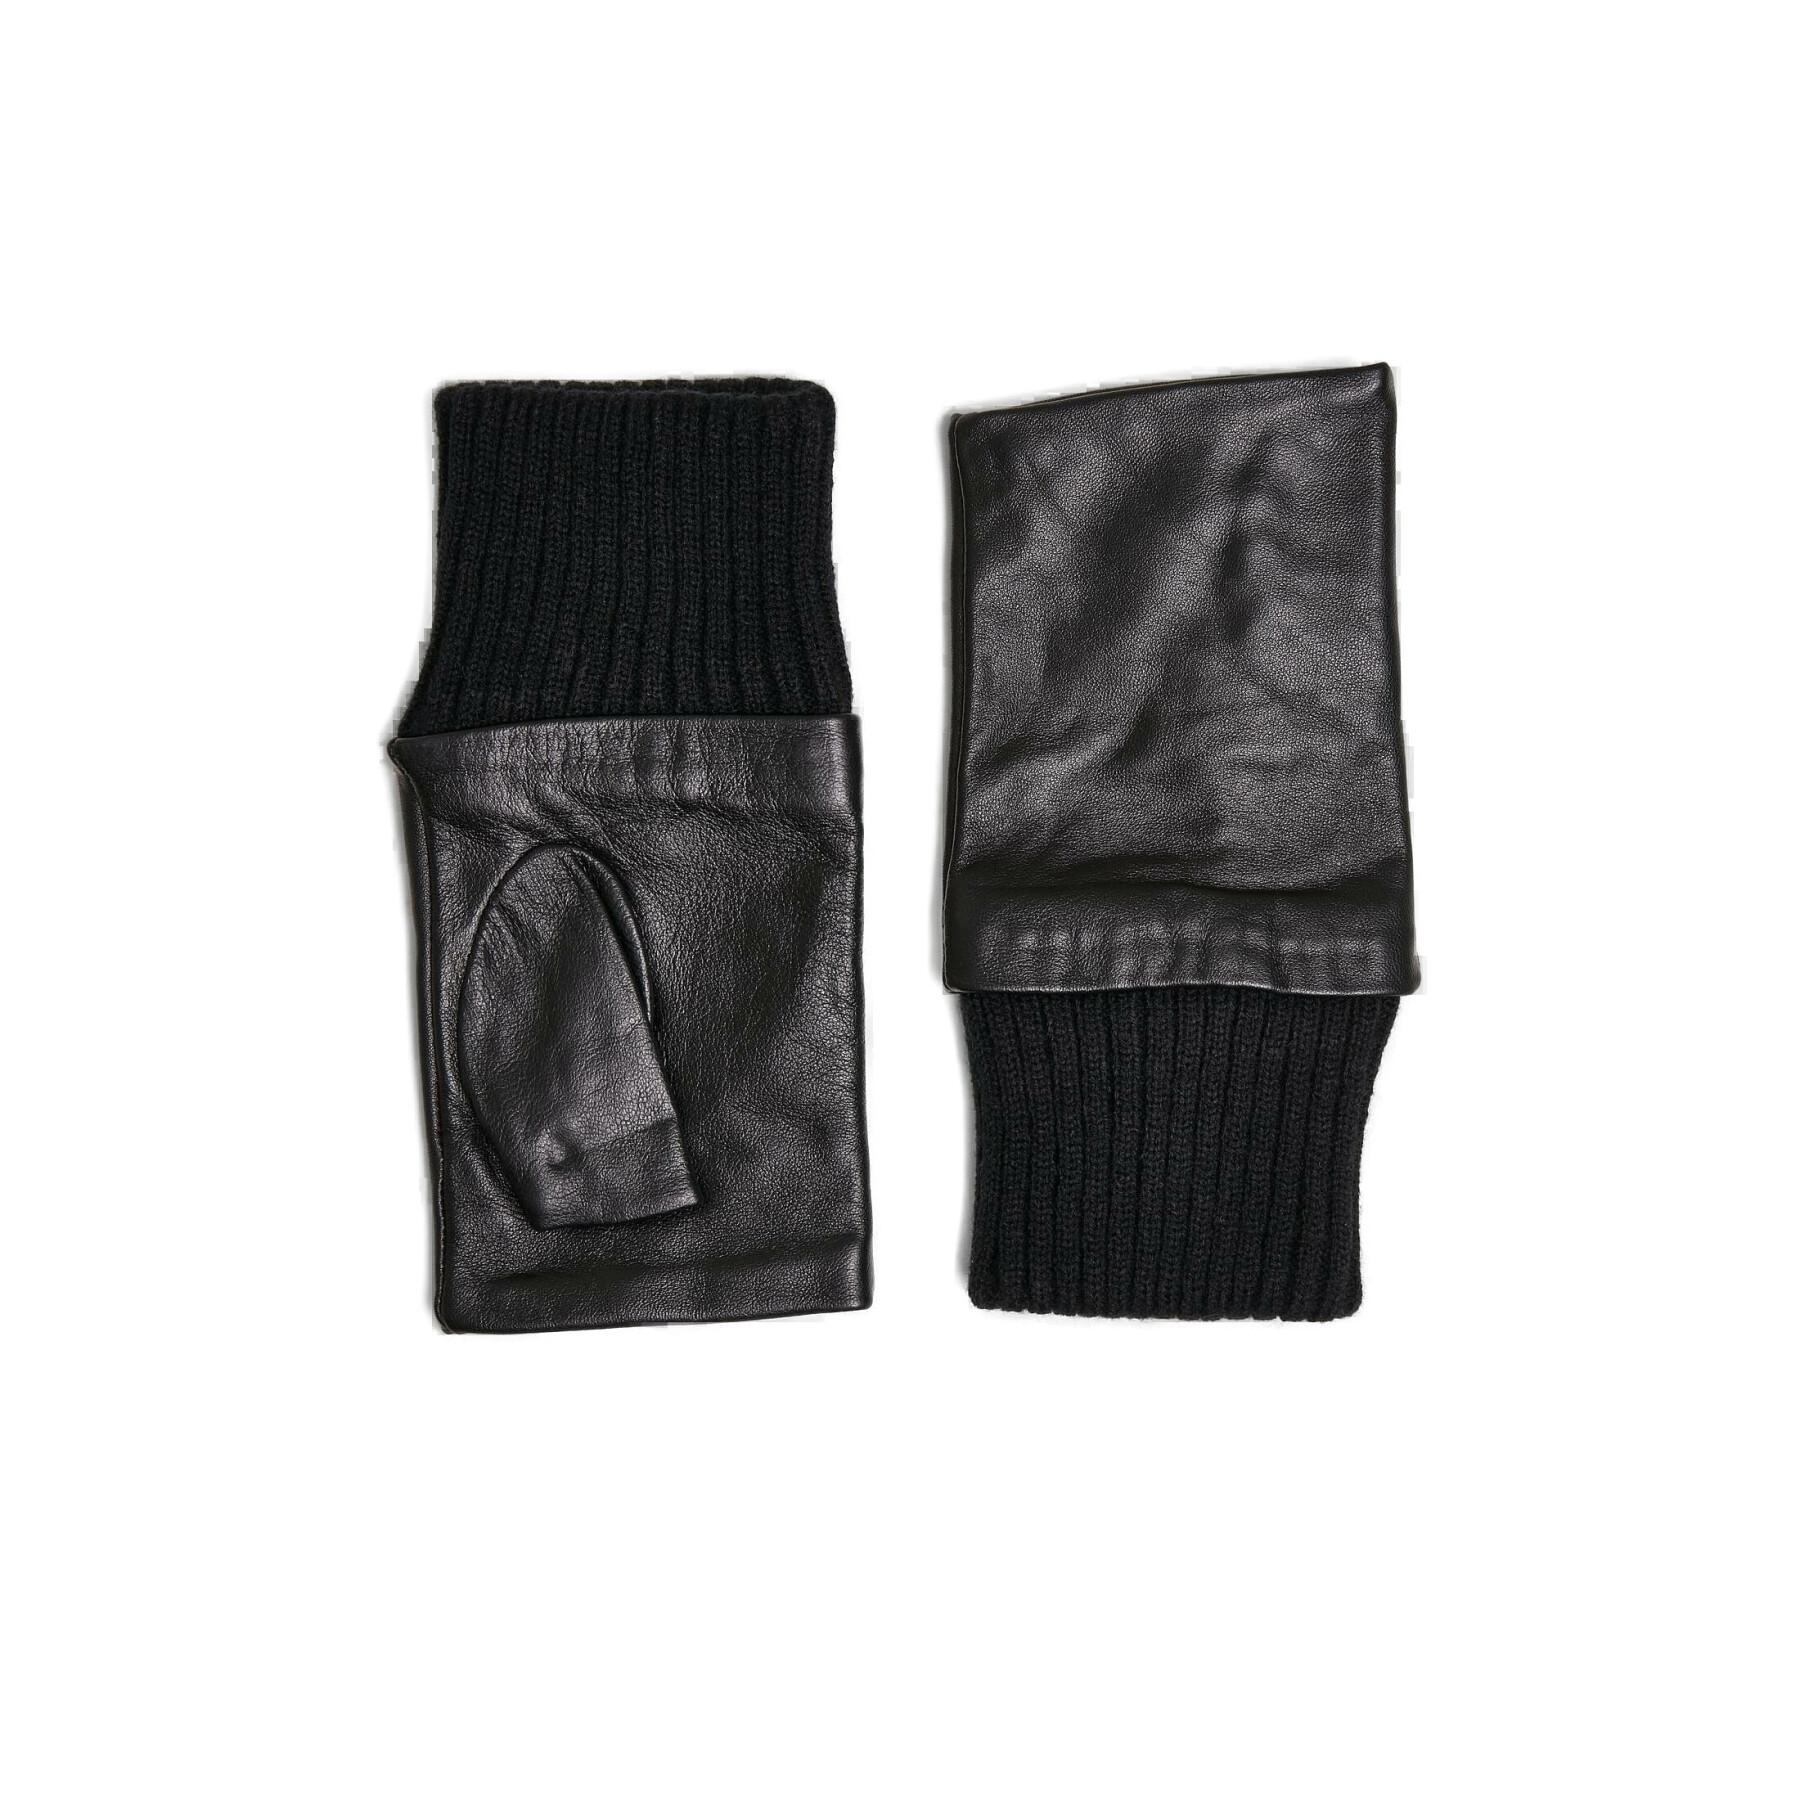 Synthetic leather half-finger gloves Urban Classics